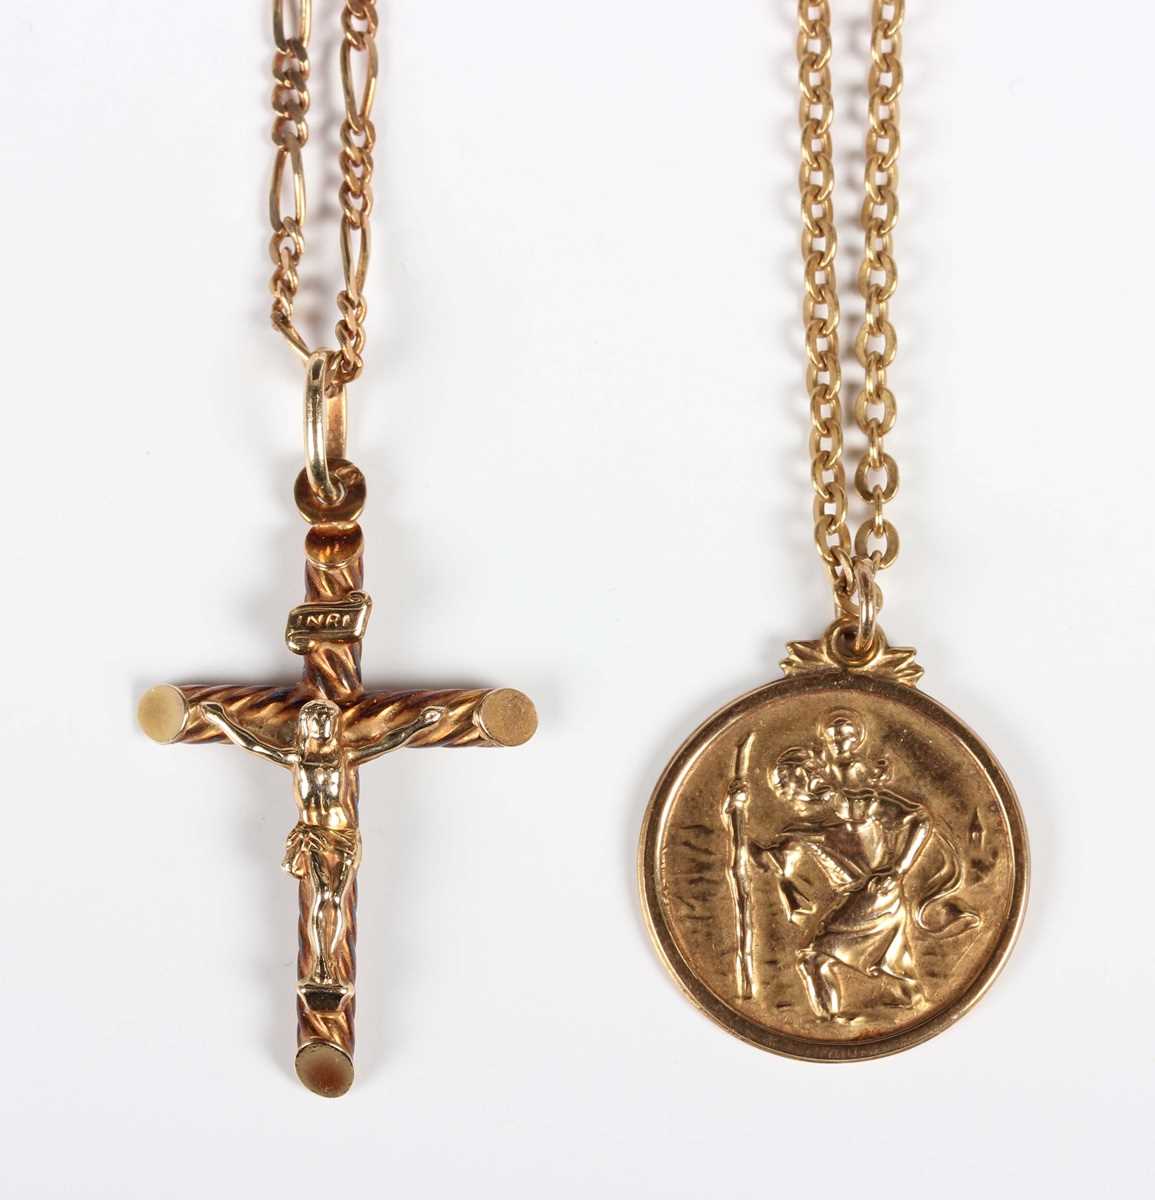 A 9ct gold pendant crucifix, length 3.9cm, with a 9ct gold Figaro link neckchain on a boltring